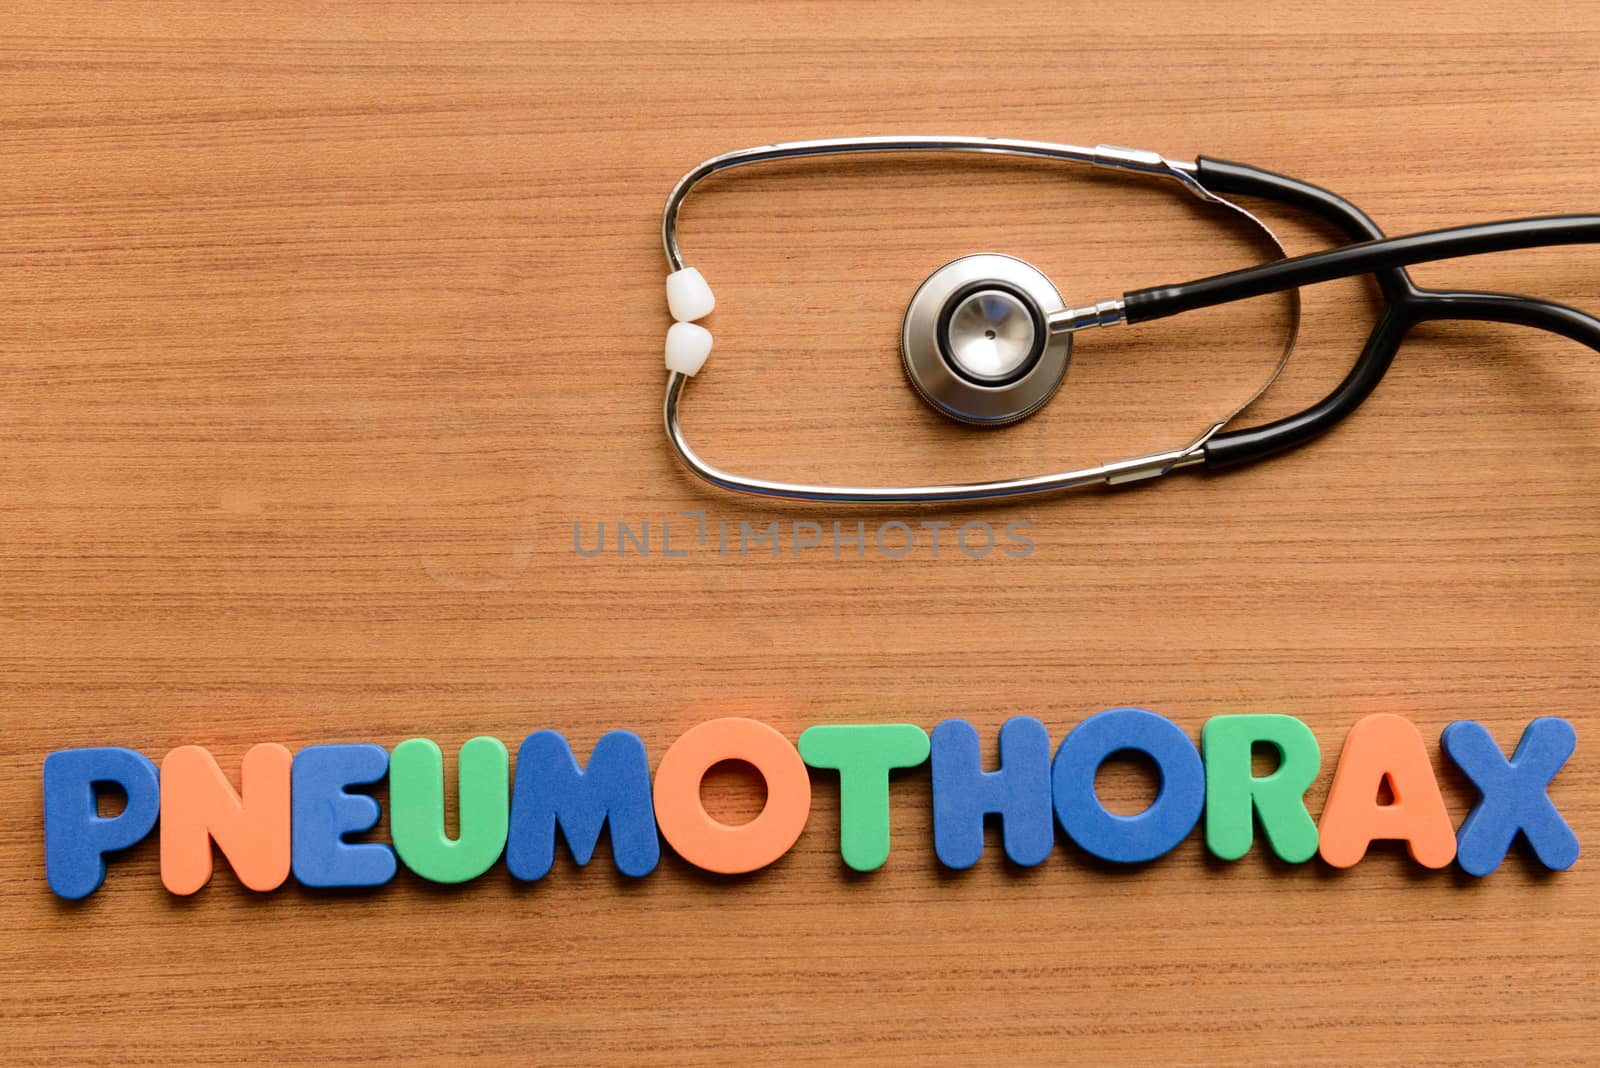 Pneumothorax colorful word on the wooden background